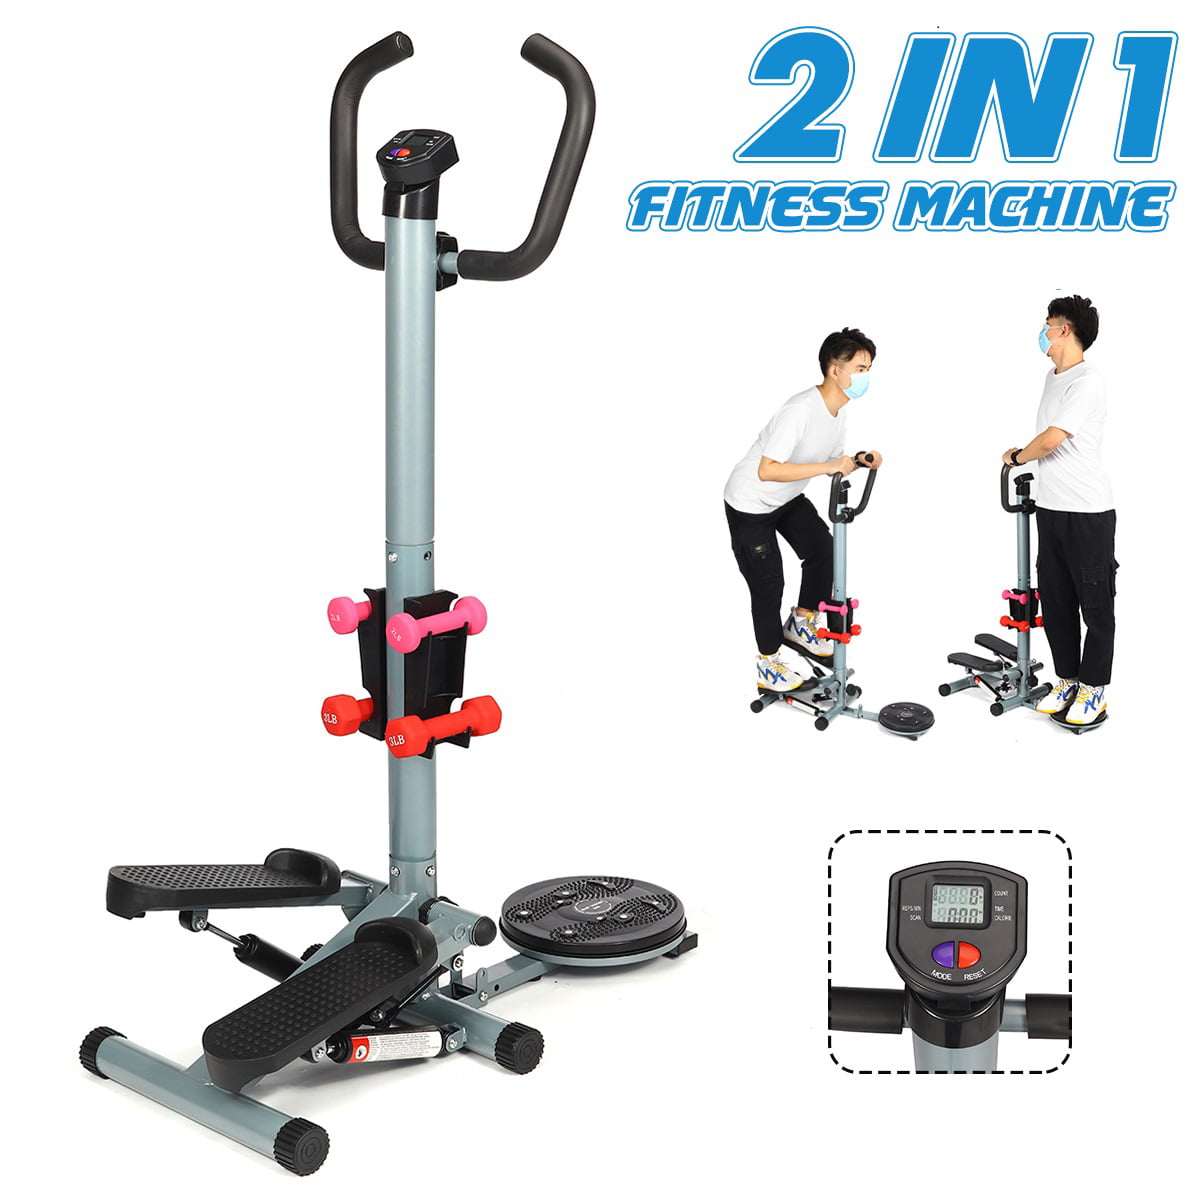 Akonza Stepper with Handle Bar Step LCD Display Fitness Equipment GYM Training Body Workout